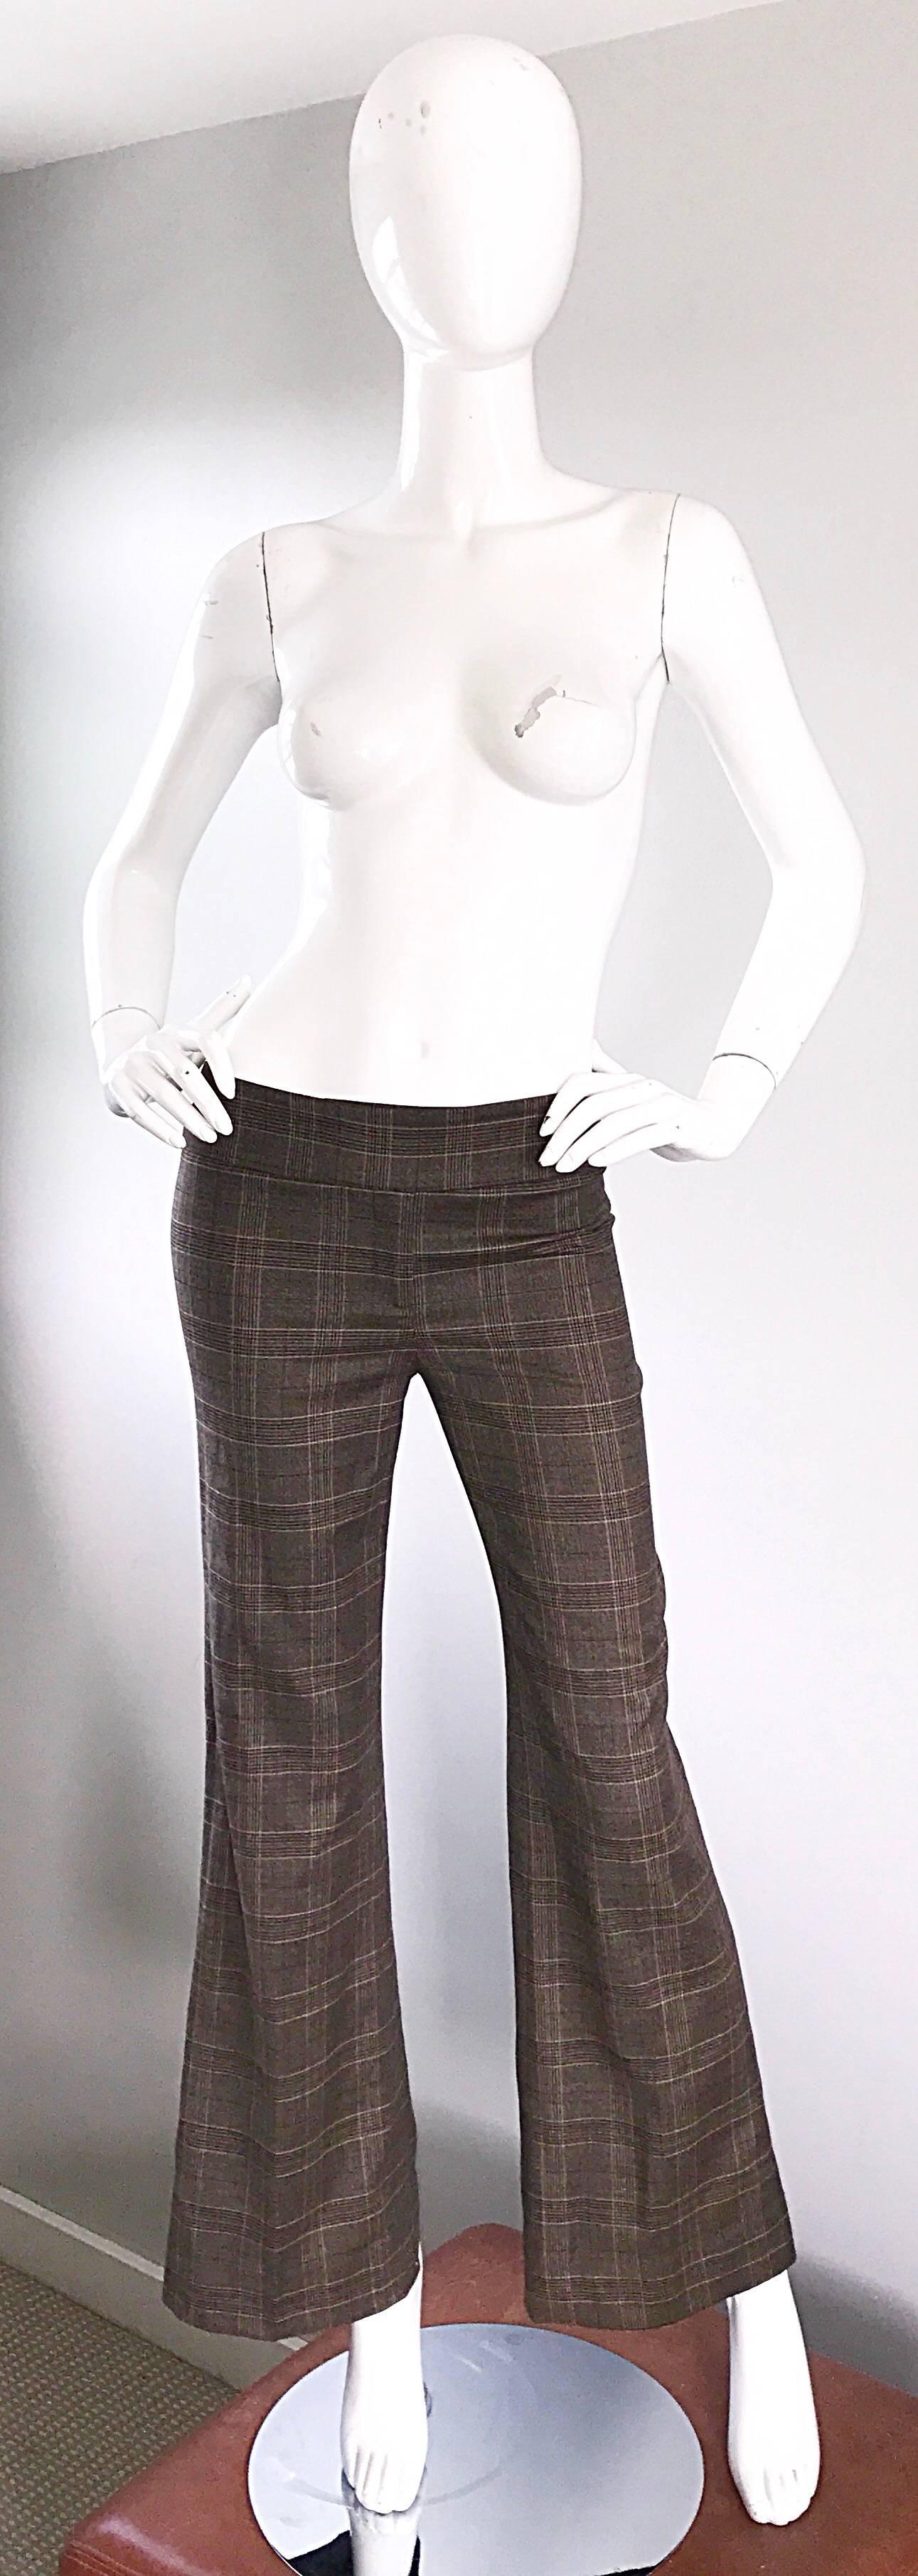 Chic and brand new MICHAEL KORS COLLECTION brown glen plaid virgin wool flared leg low rise trousers! Features a timeless glen plaid thorughout in browns and dark purple. Flattering low rise, with zip fly, interior button closure, and two buttons at